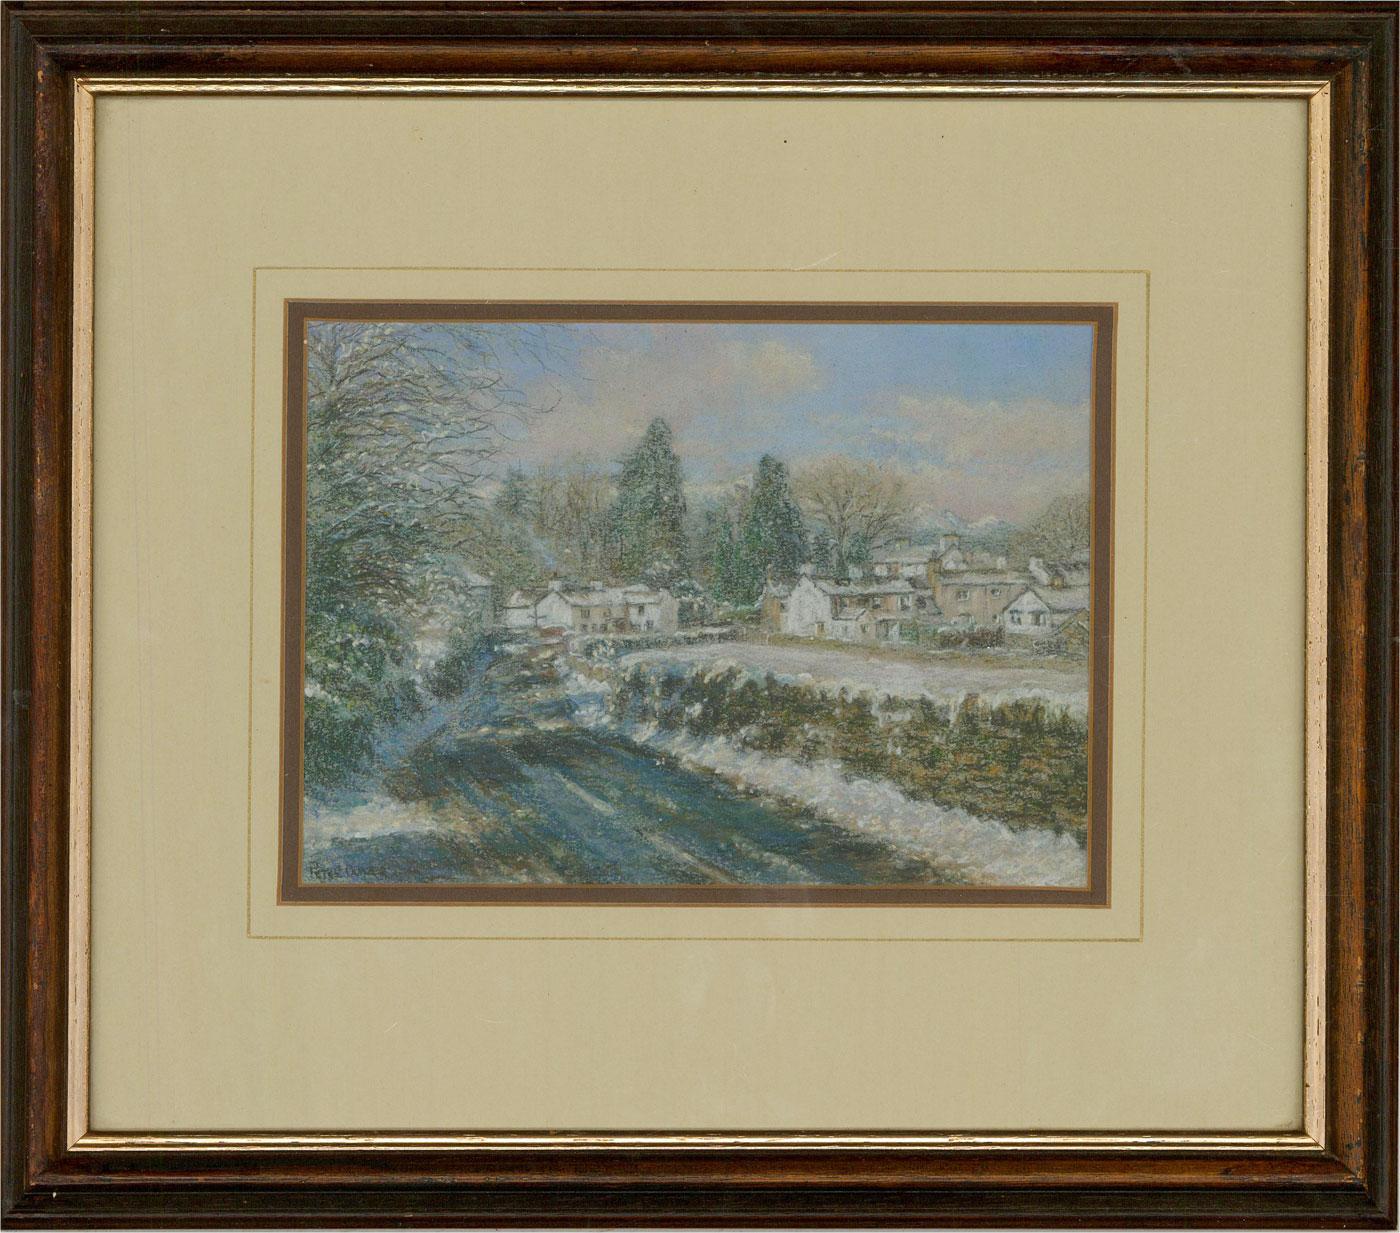 A pastel scene showing the road into the village. Well presented in a double card mount in a simple wooden frame. Signed to the lower left. On wove.
